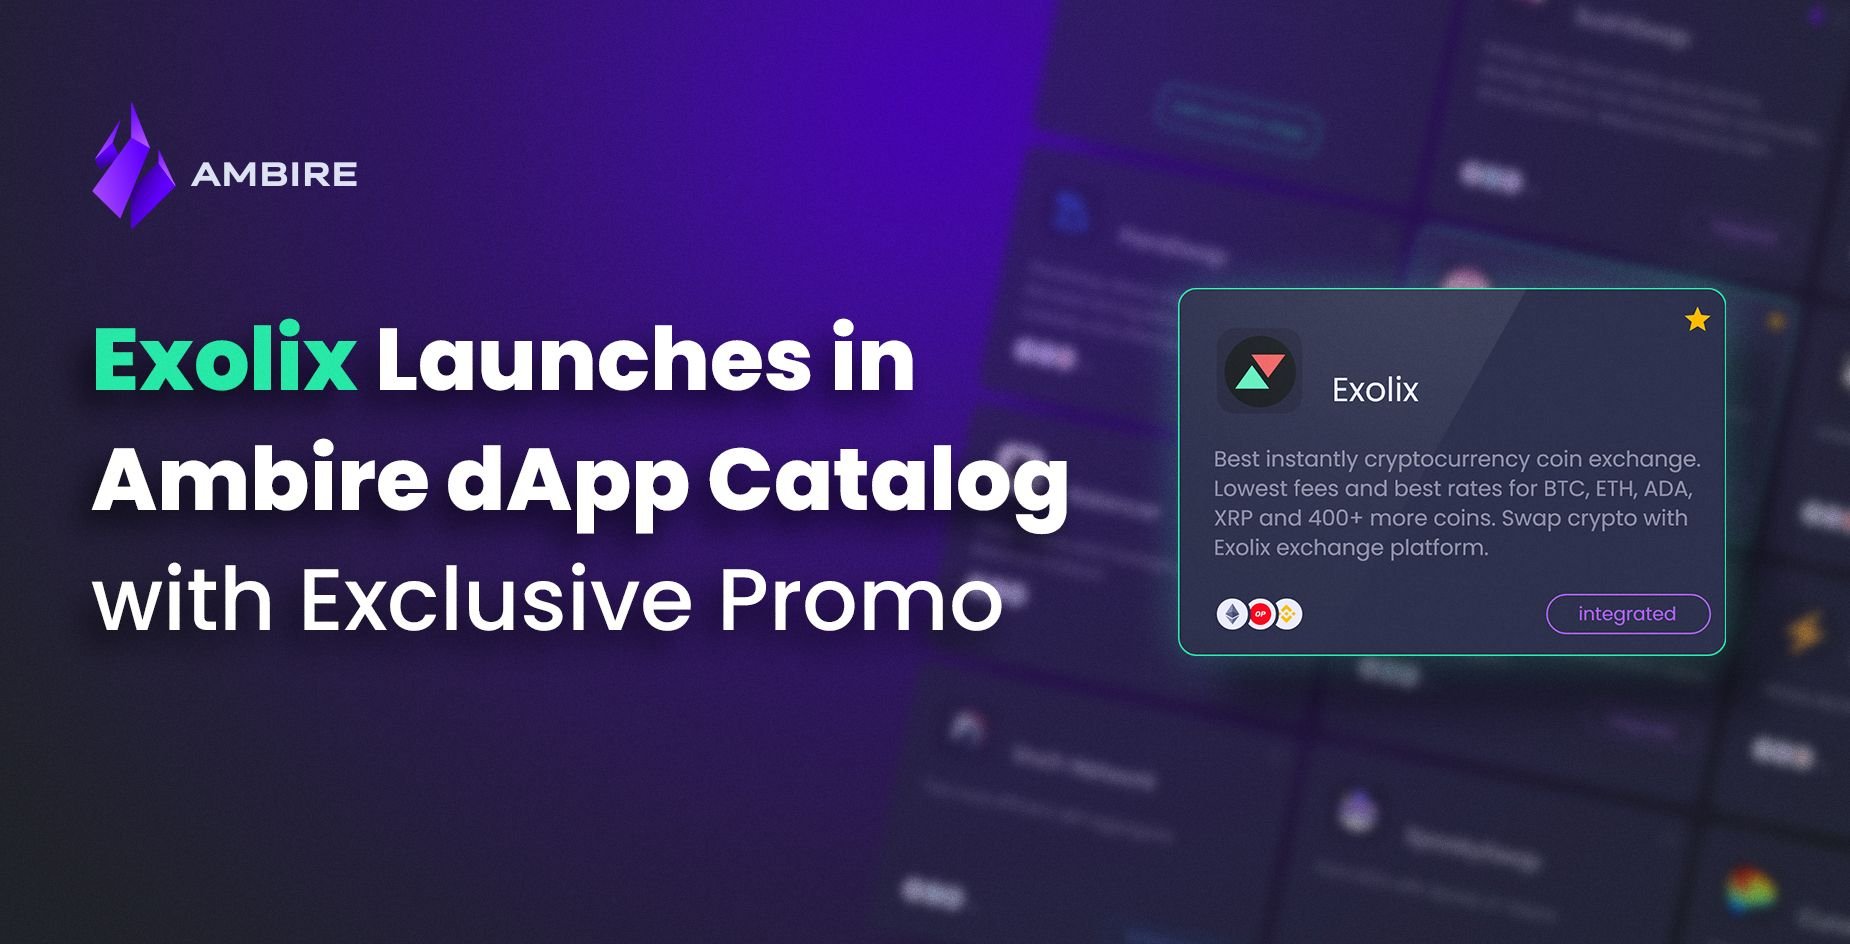 Exolix Launches in Ambire dApp Catalog with Exclusive Promo